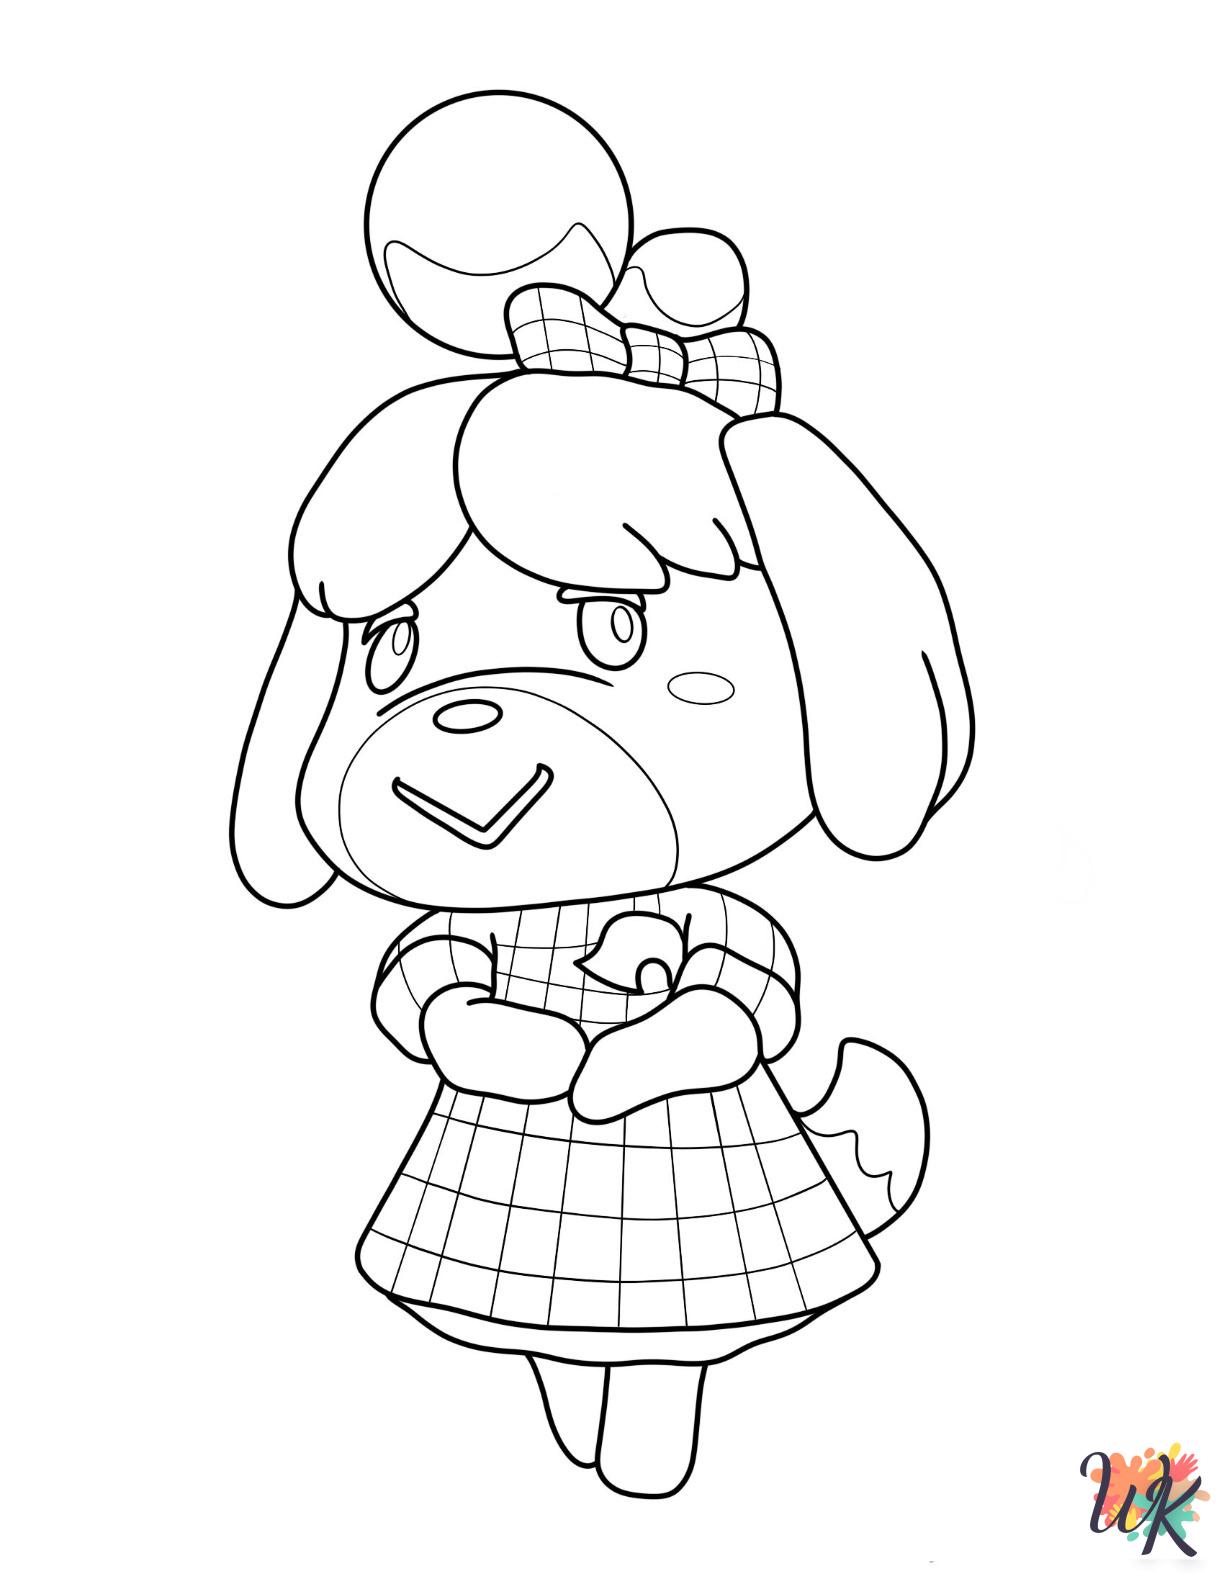 Animal Crossing coloring pages easy